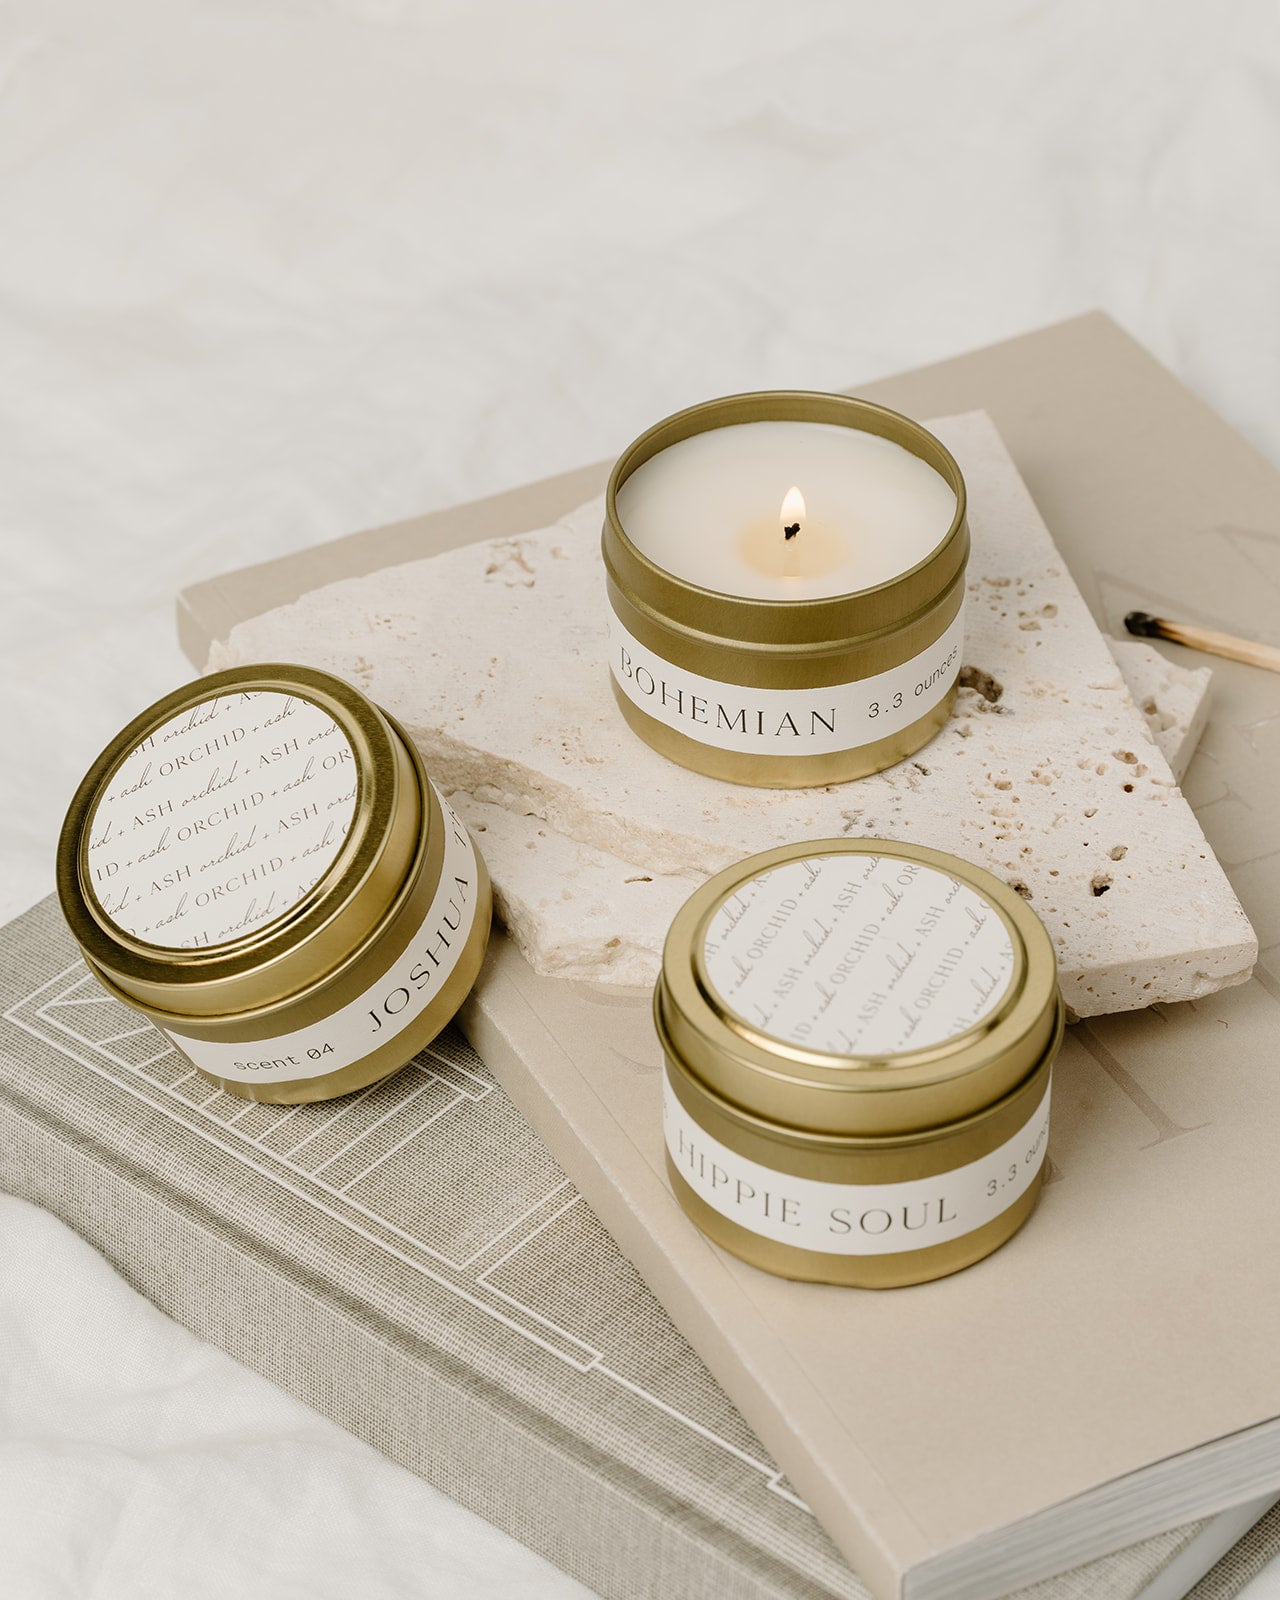 Thymes ‐ Goldleaf Candle ‐ Pioneer Linens